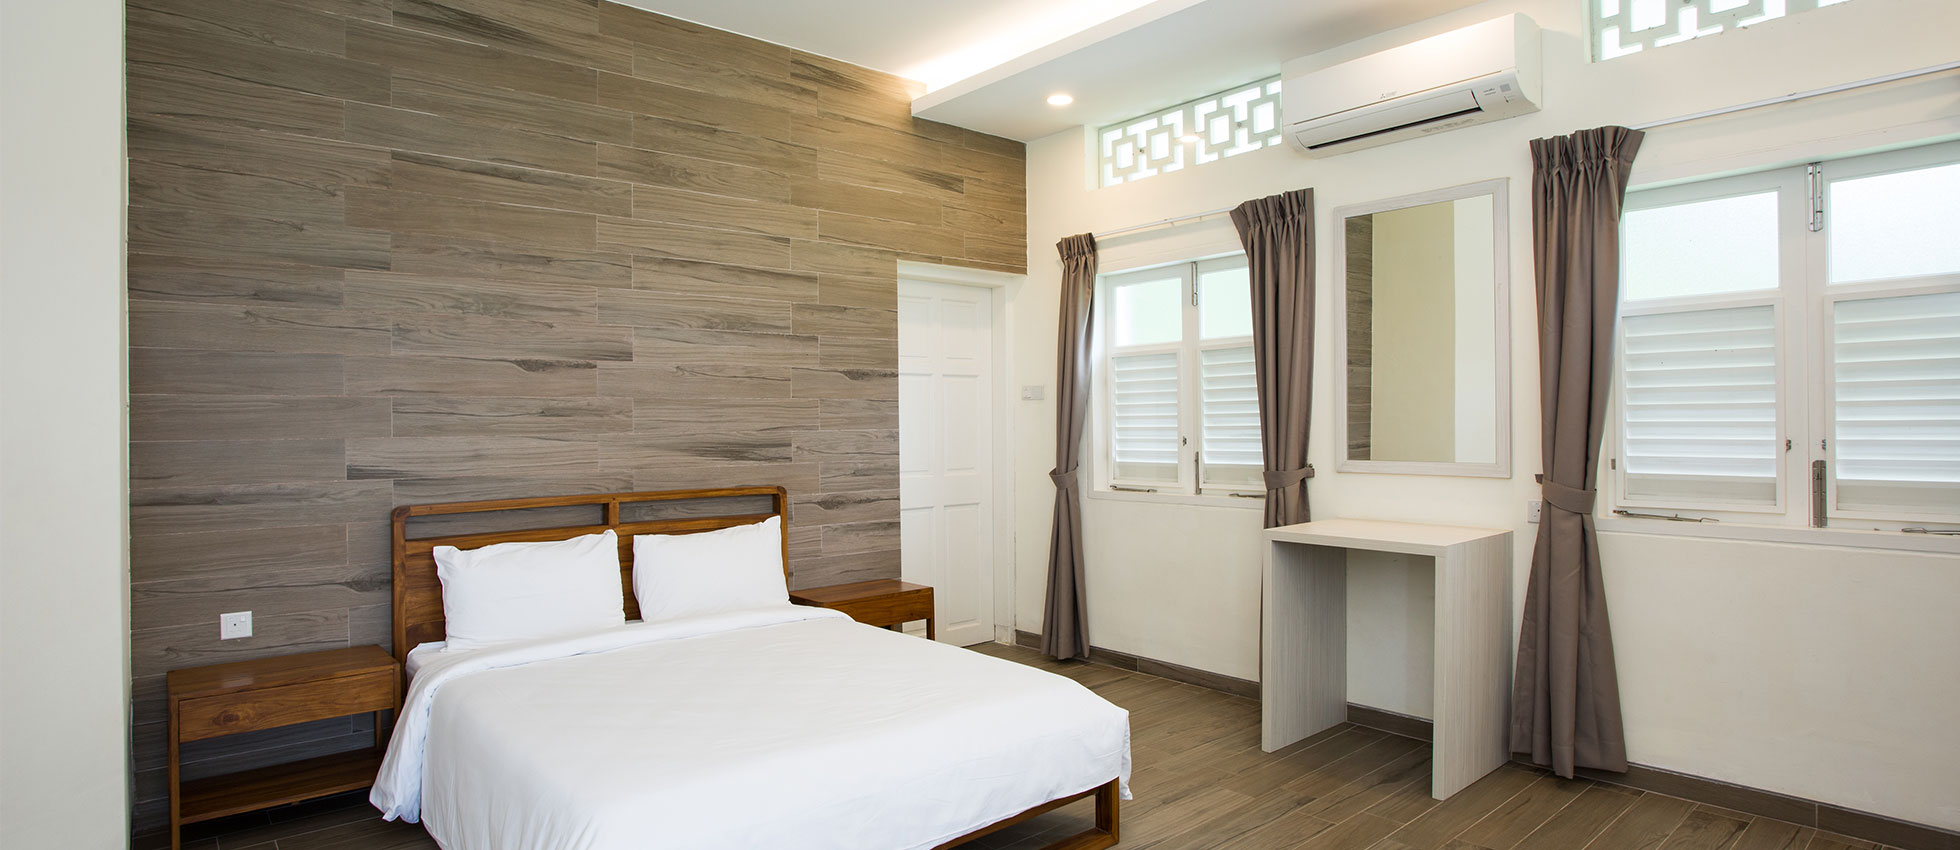 chalets in singapore - CSC Changi chalet bedroom